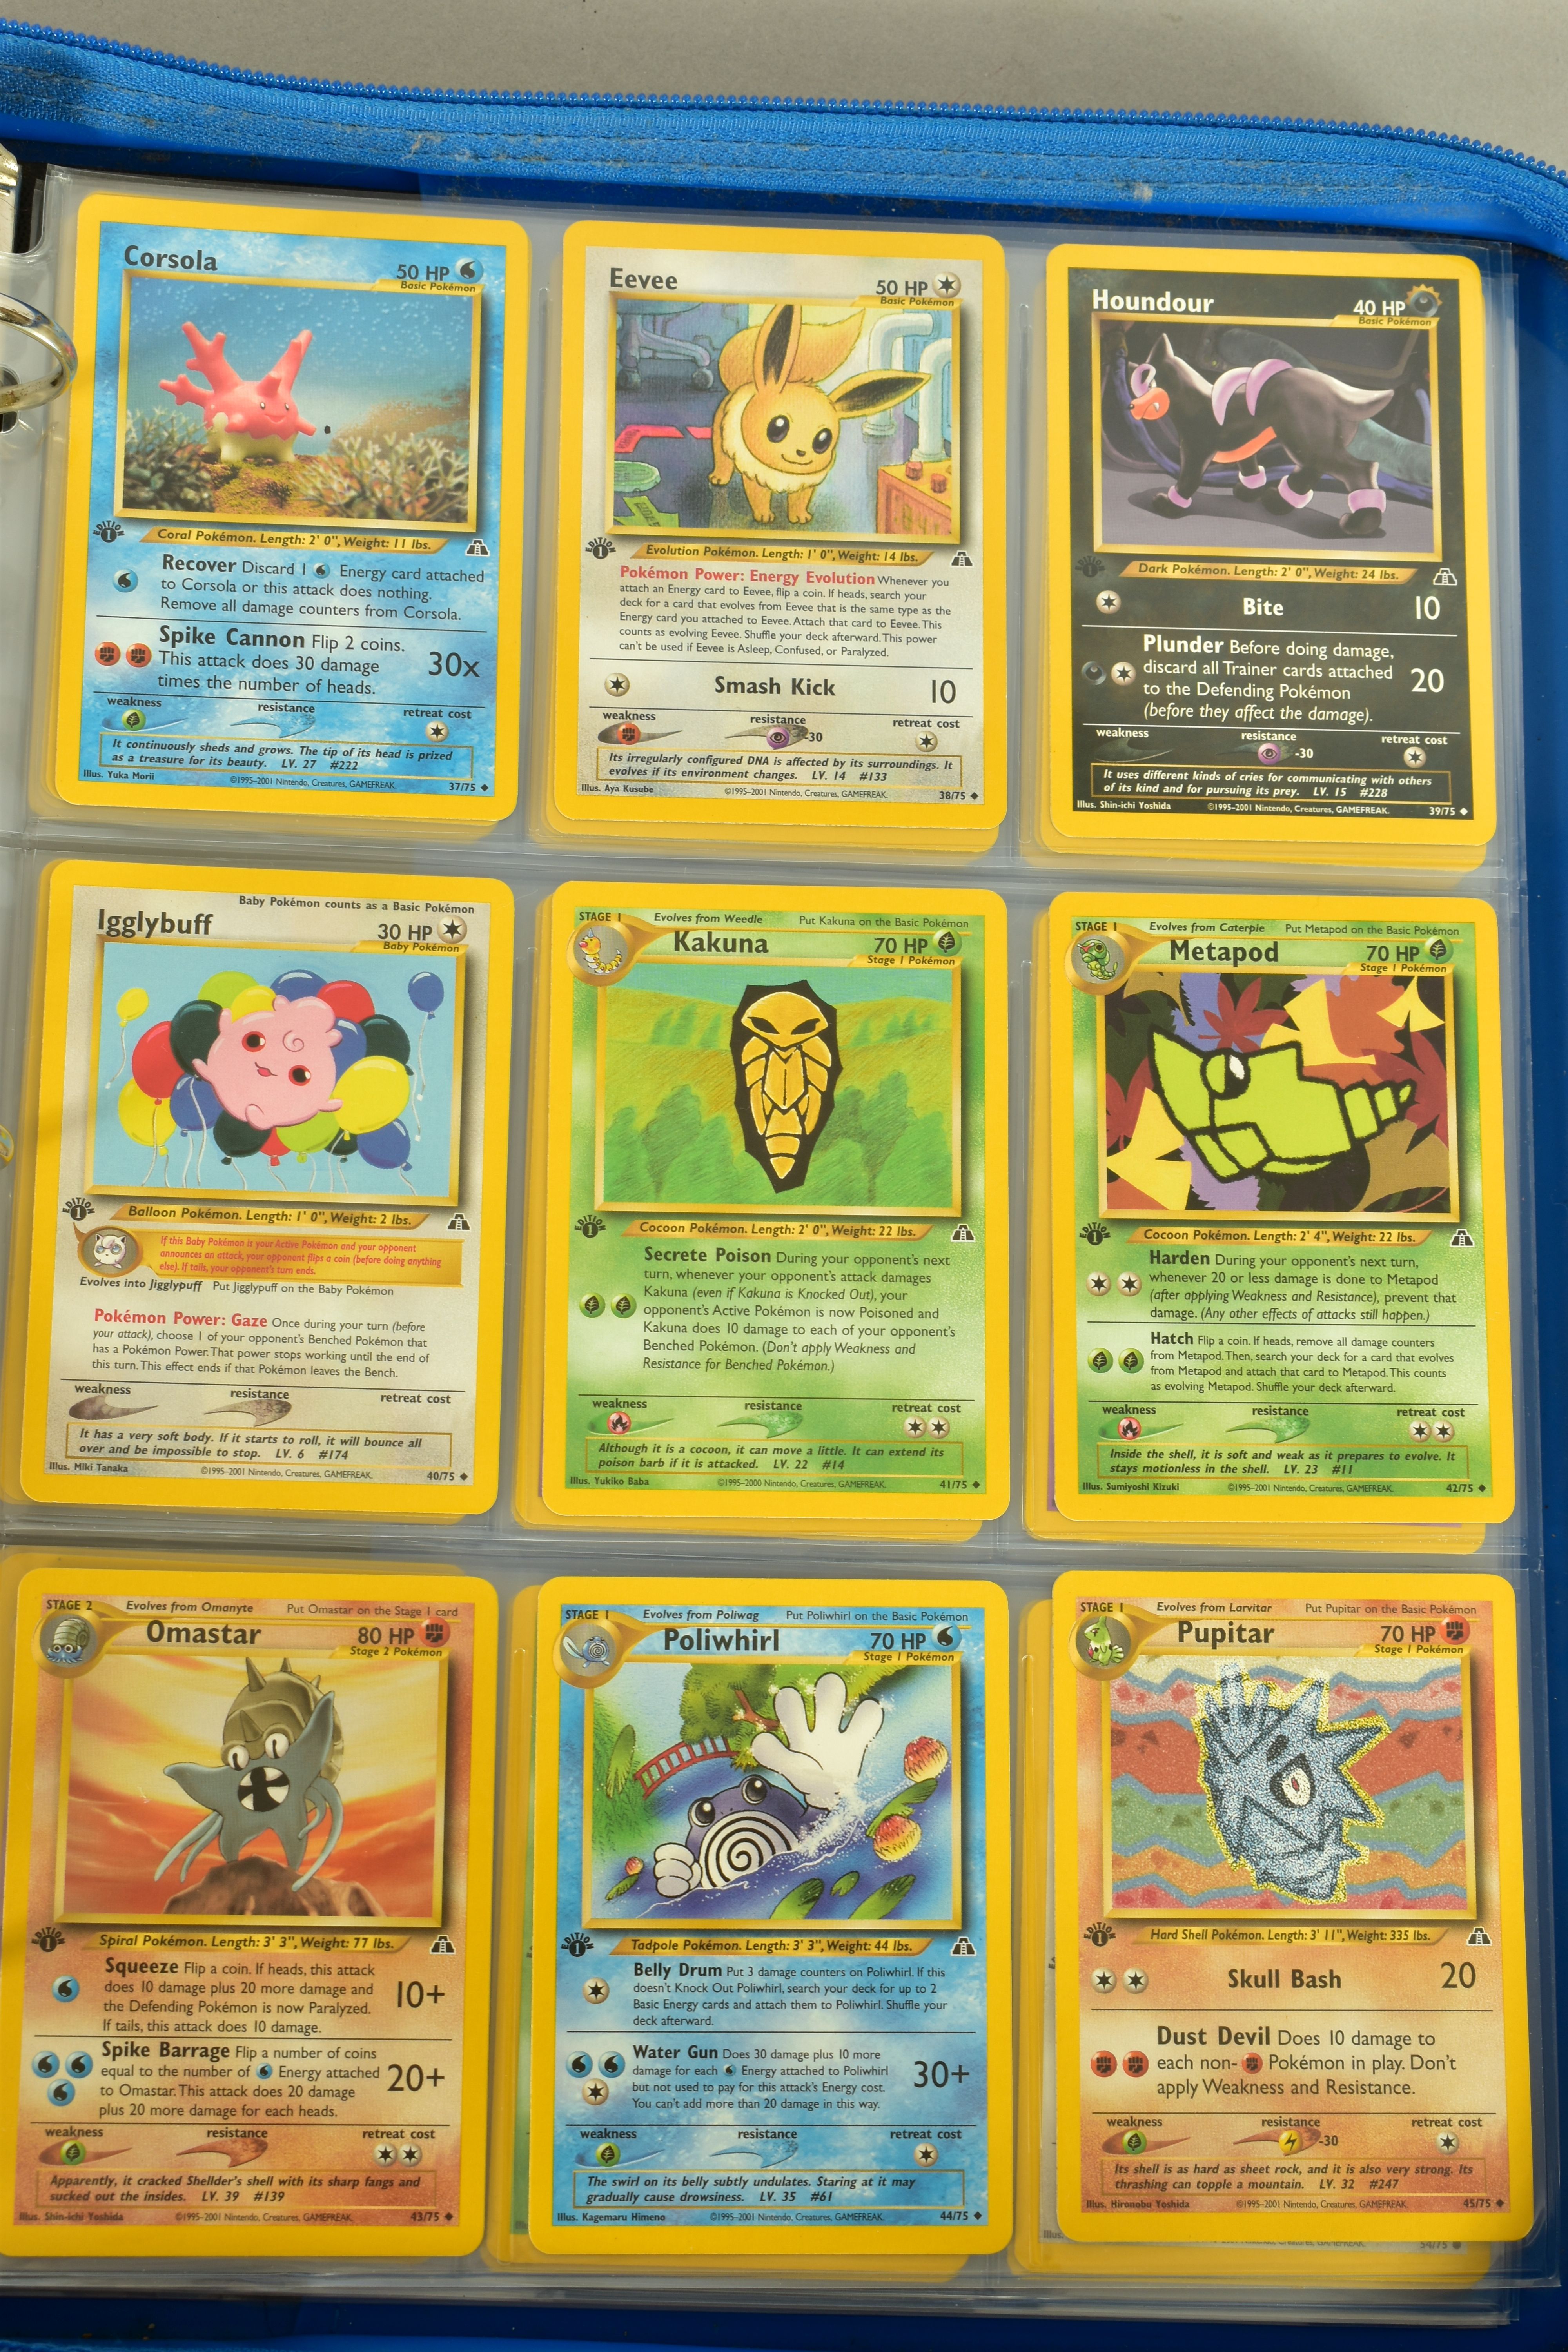 THE COMPLETE POKEMON CARD NEO GENESIS AND NEO DISCOVERY SETS, containing many first edition cards. - Image 28 of 32